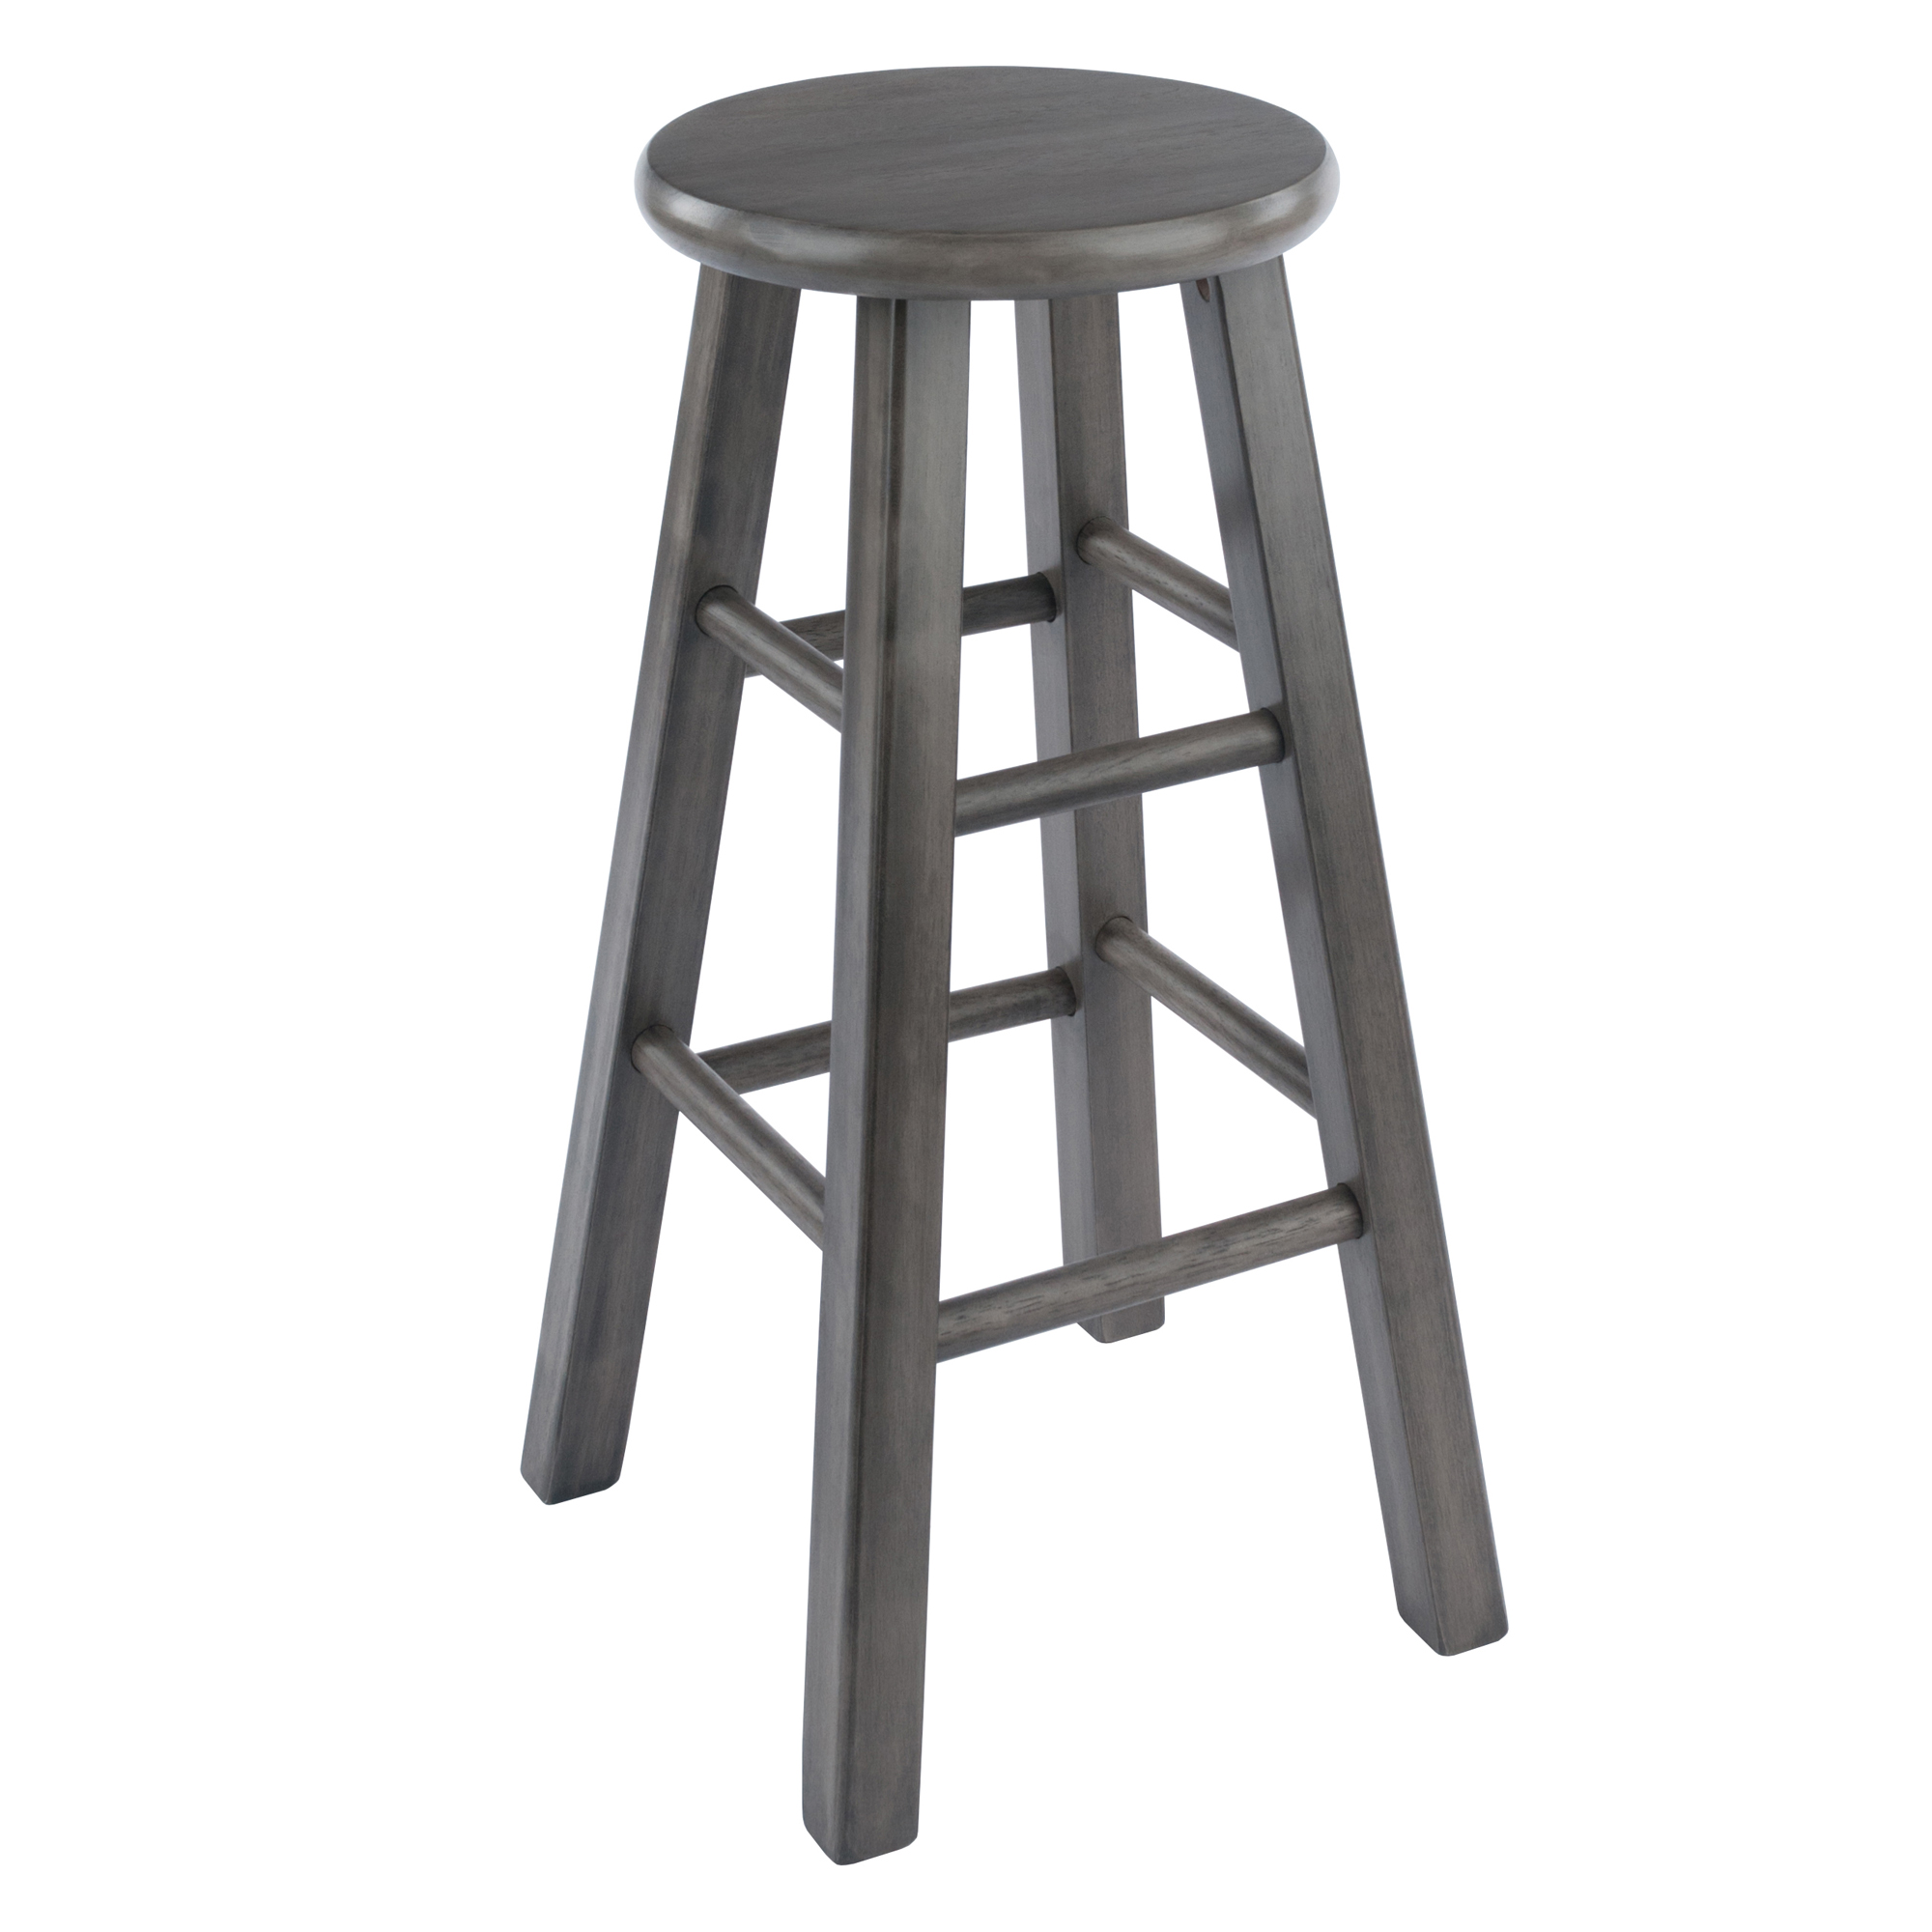 Winsome Wood Ivy 24" Counter Stool, Rustic Gray Finish - image 1 of 7